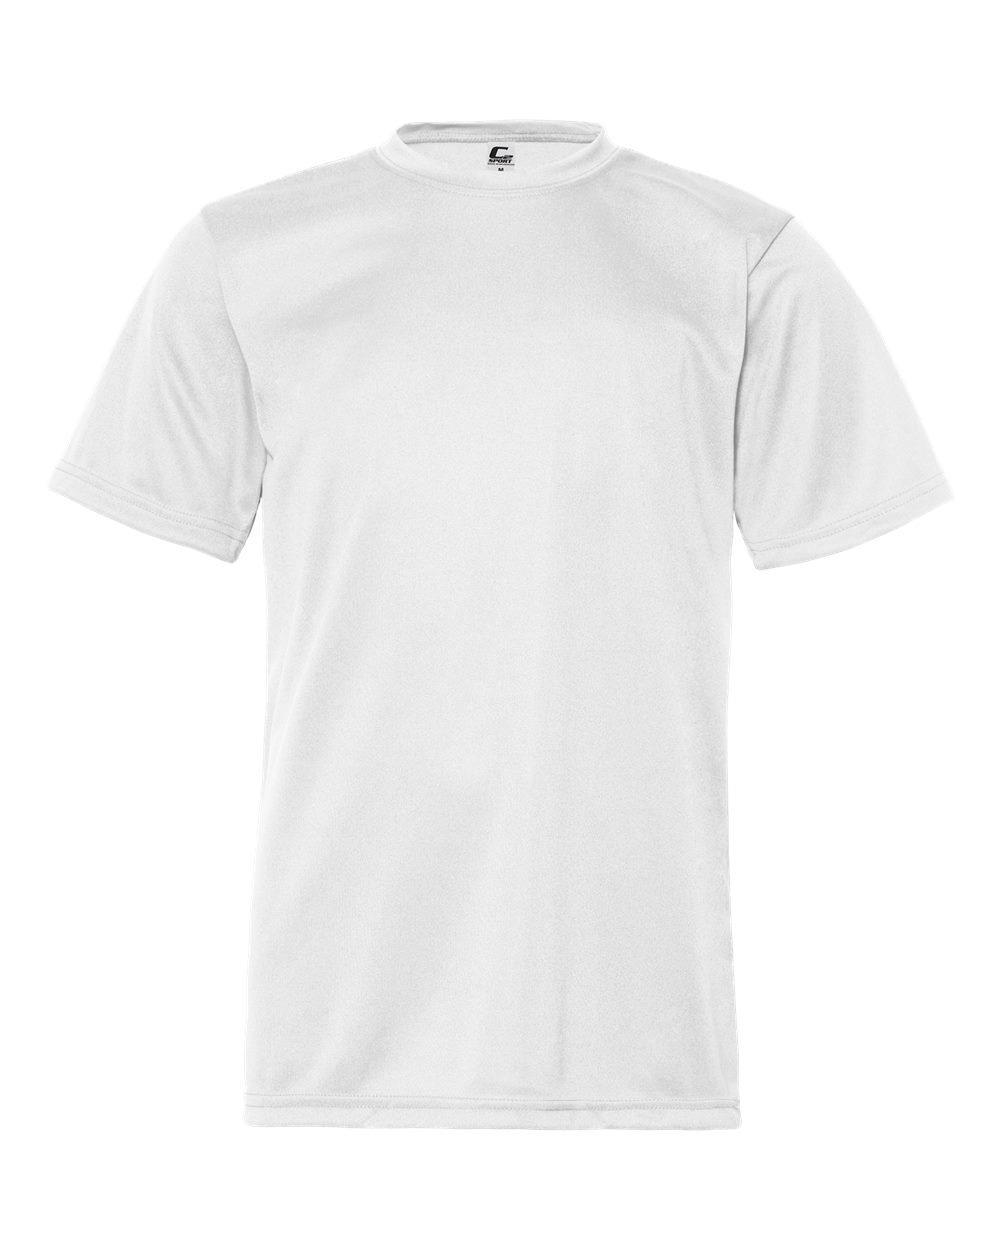 Youth Performance T-Shirt-